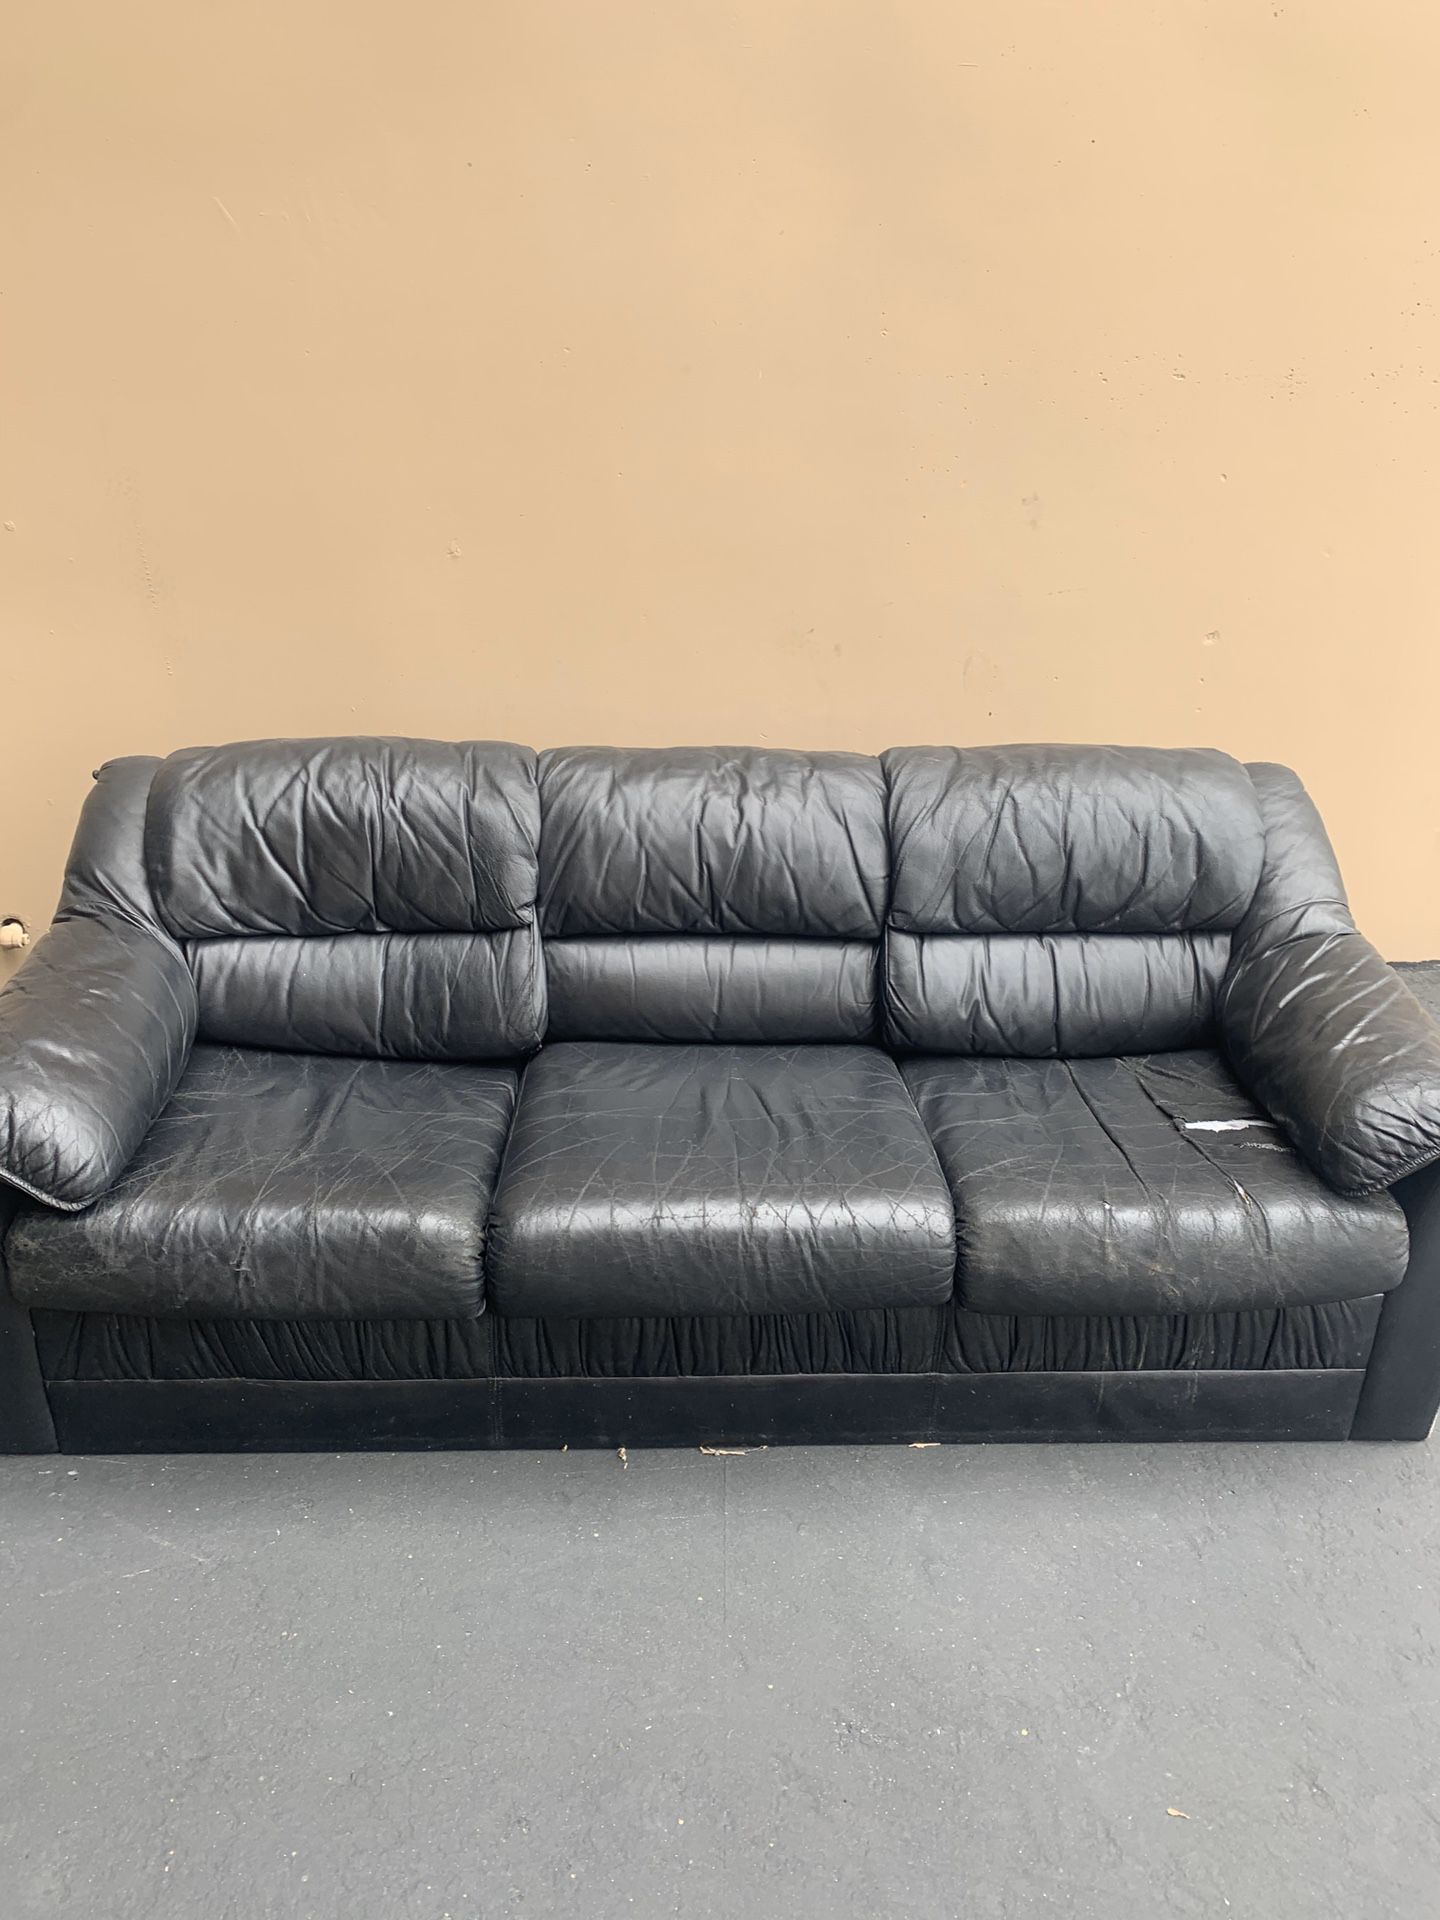 FREE couch - black leather (or fake leather)